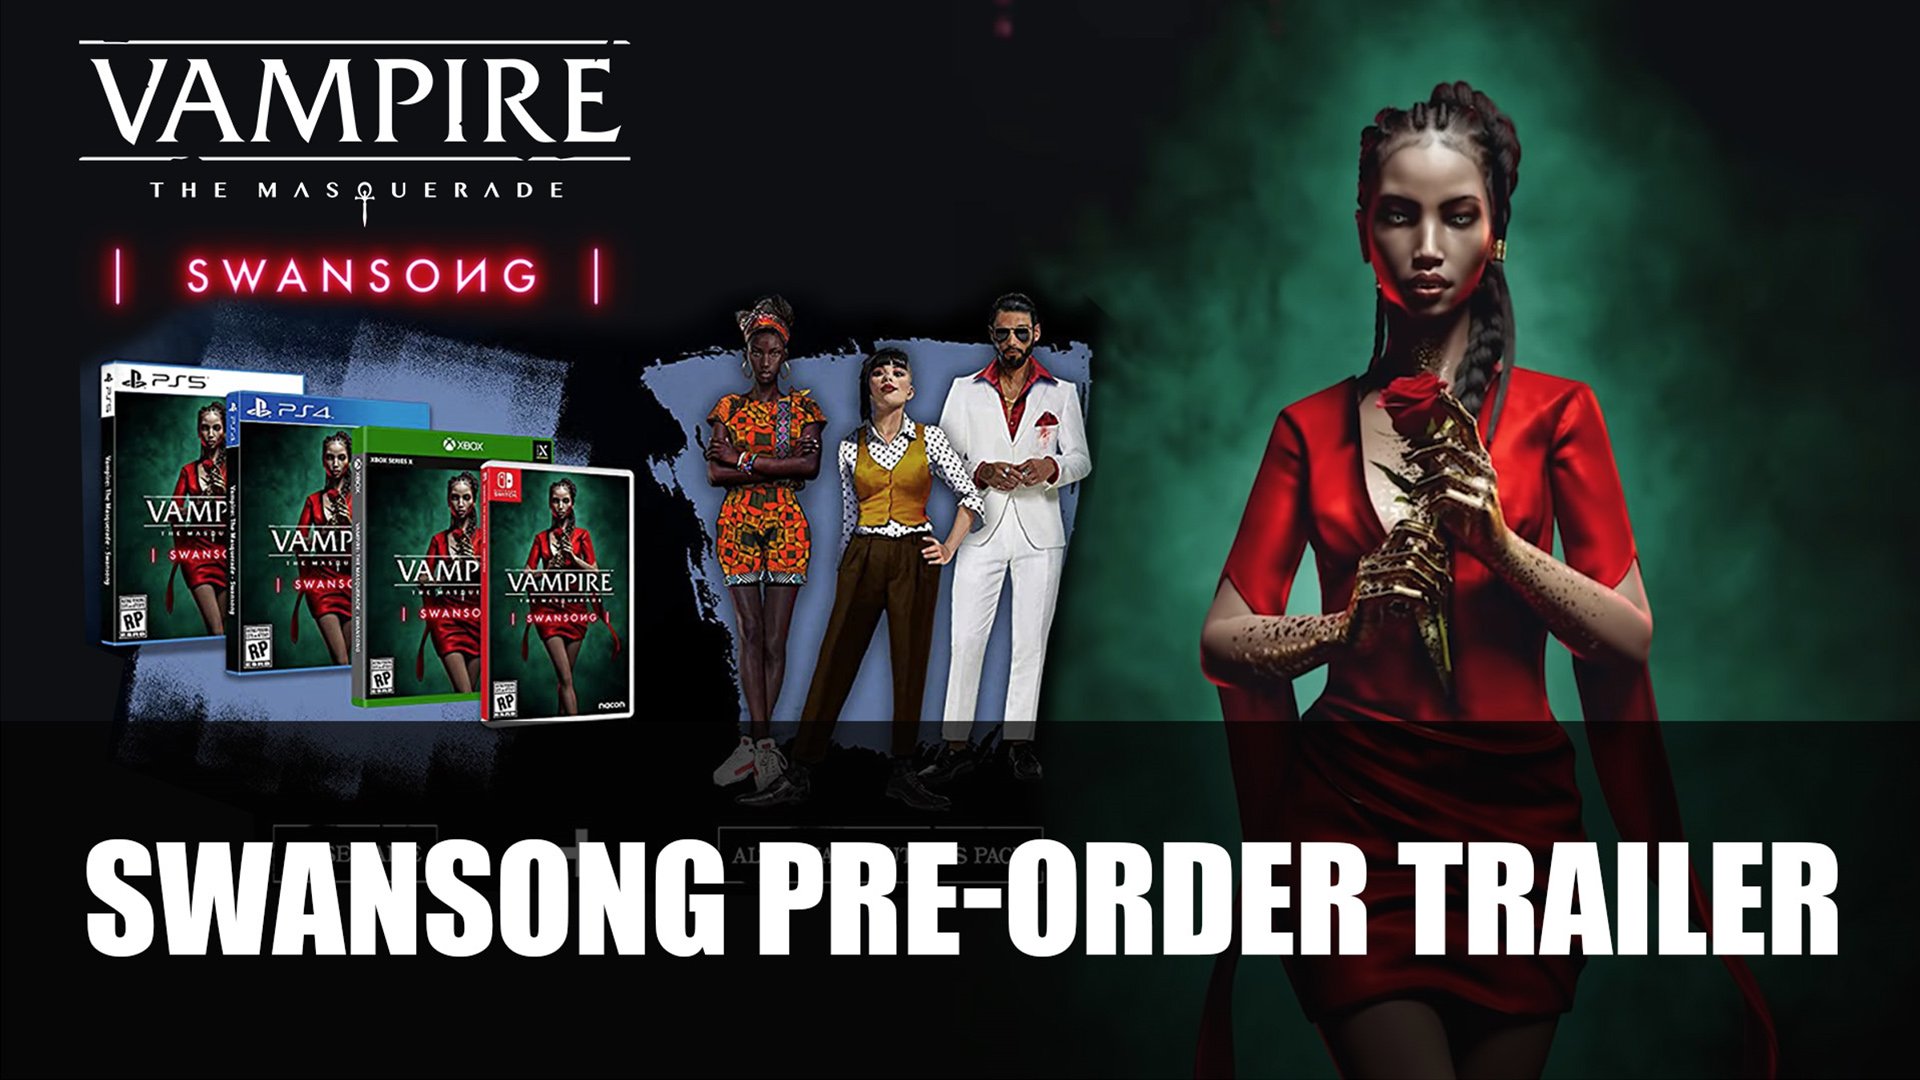 Vampire: The Masquerade - Swansong Gets Pre-Order Trailer - Fextralife